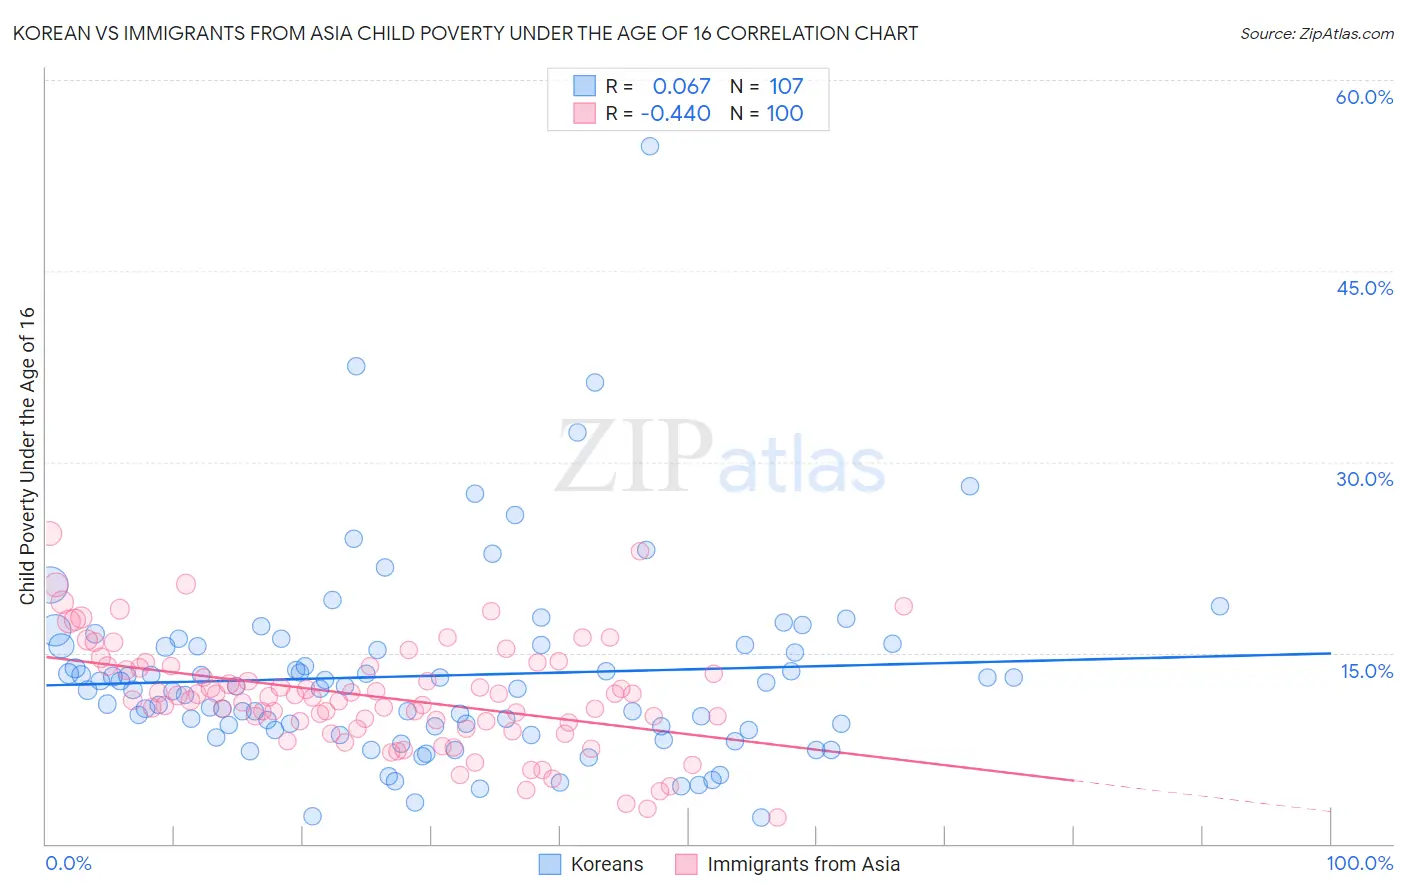 Korean vs Immigrants from Asia Child Poverty Under the Age of 16